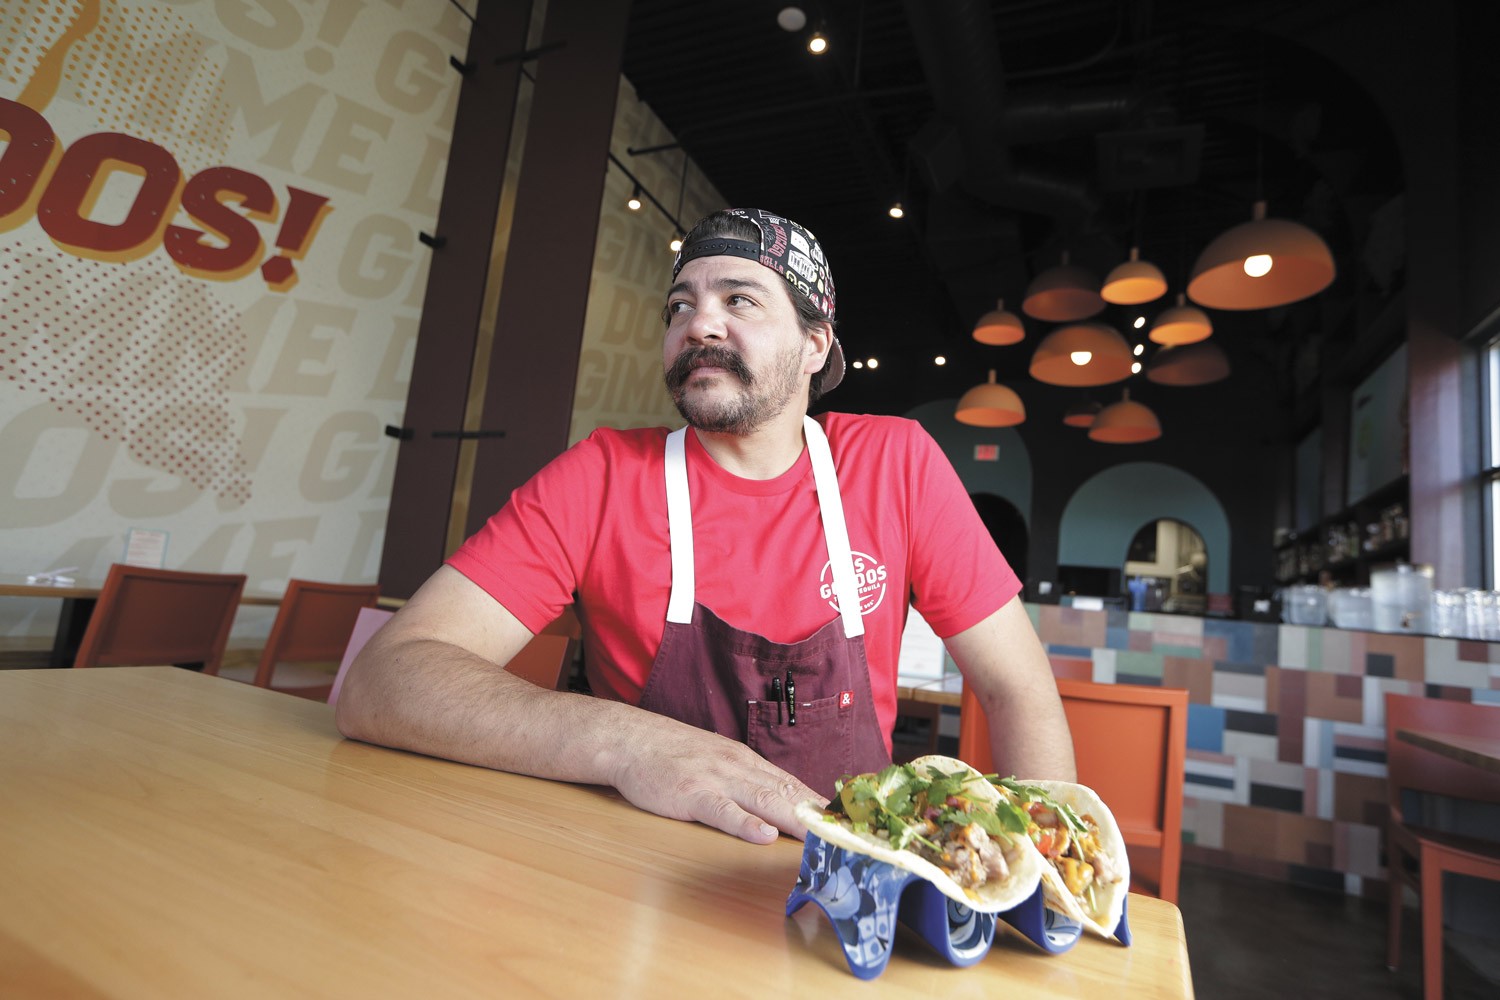 Dos Gordos' boisterous take on Mexican food might change your life